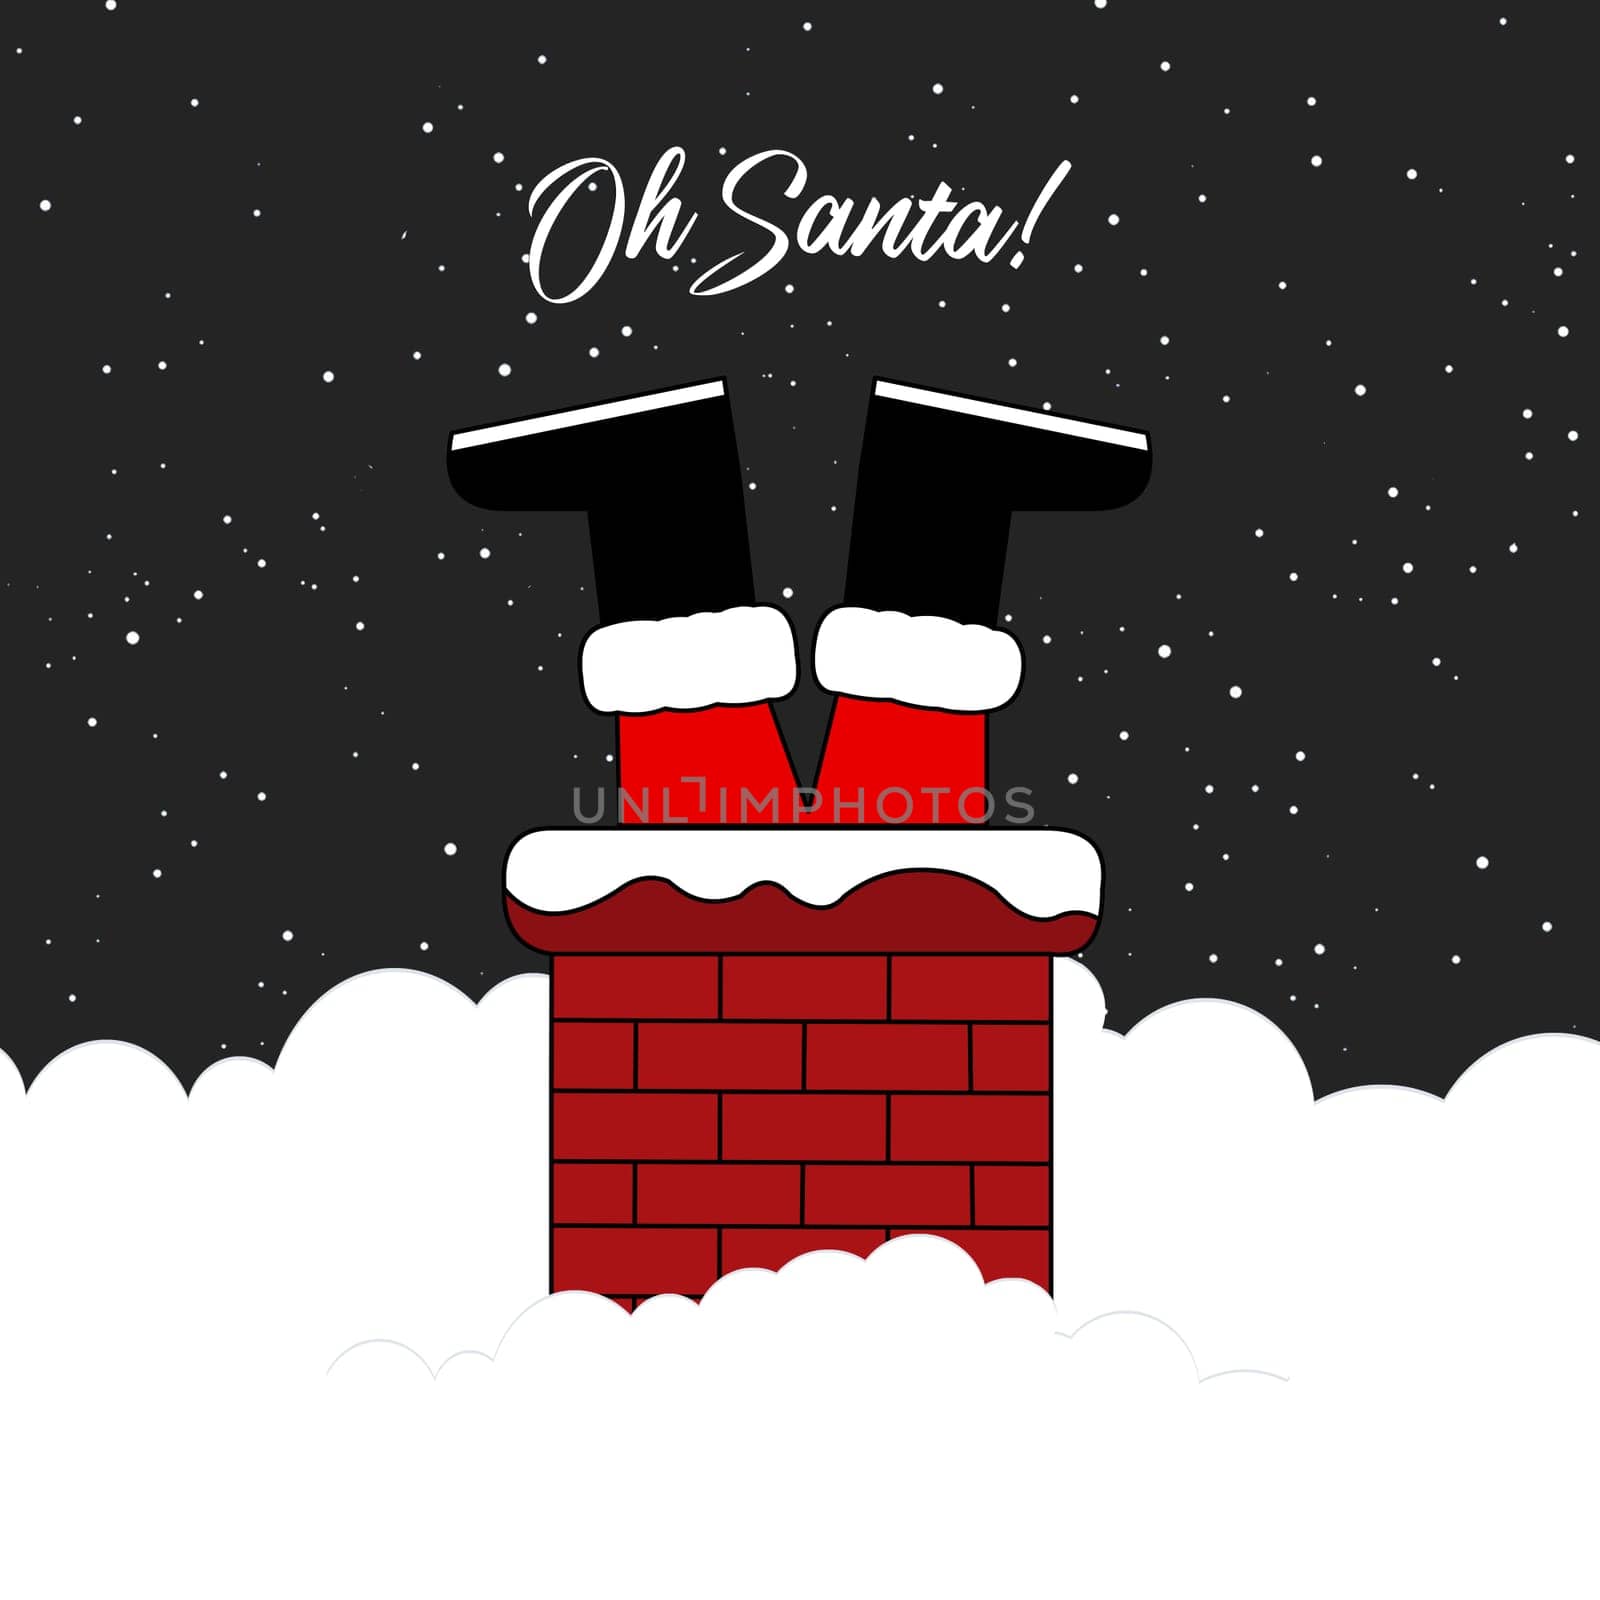 Santa claus upside down stuck in the chimney with his feet sticking out with the text above him "Oh Santa".